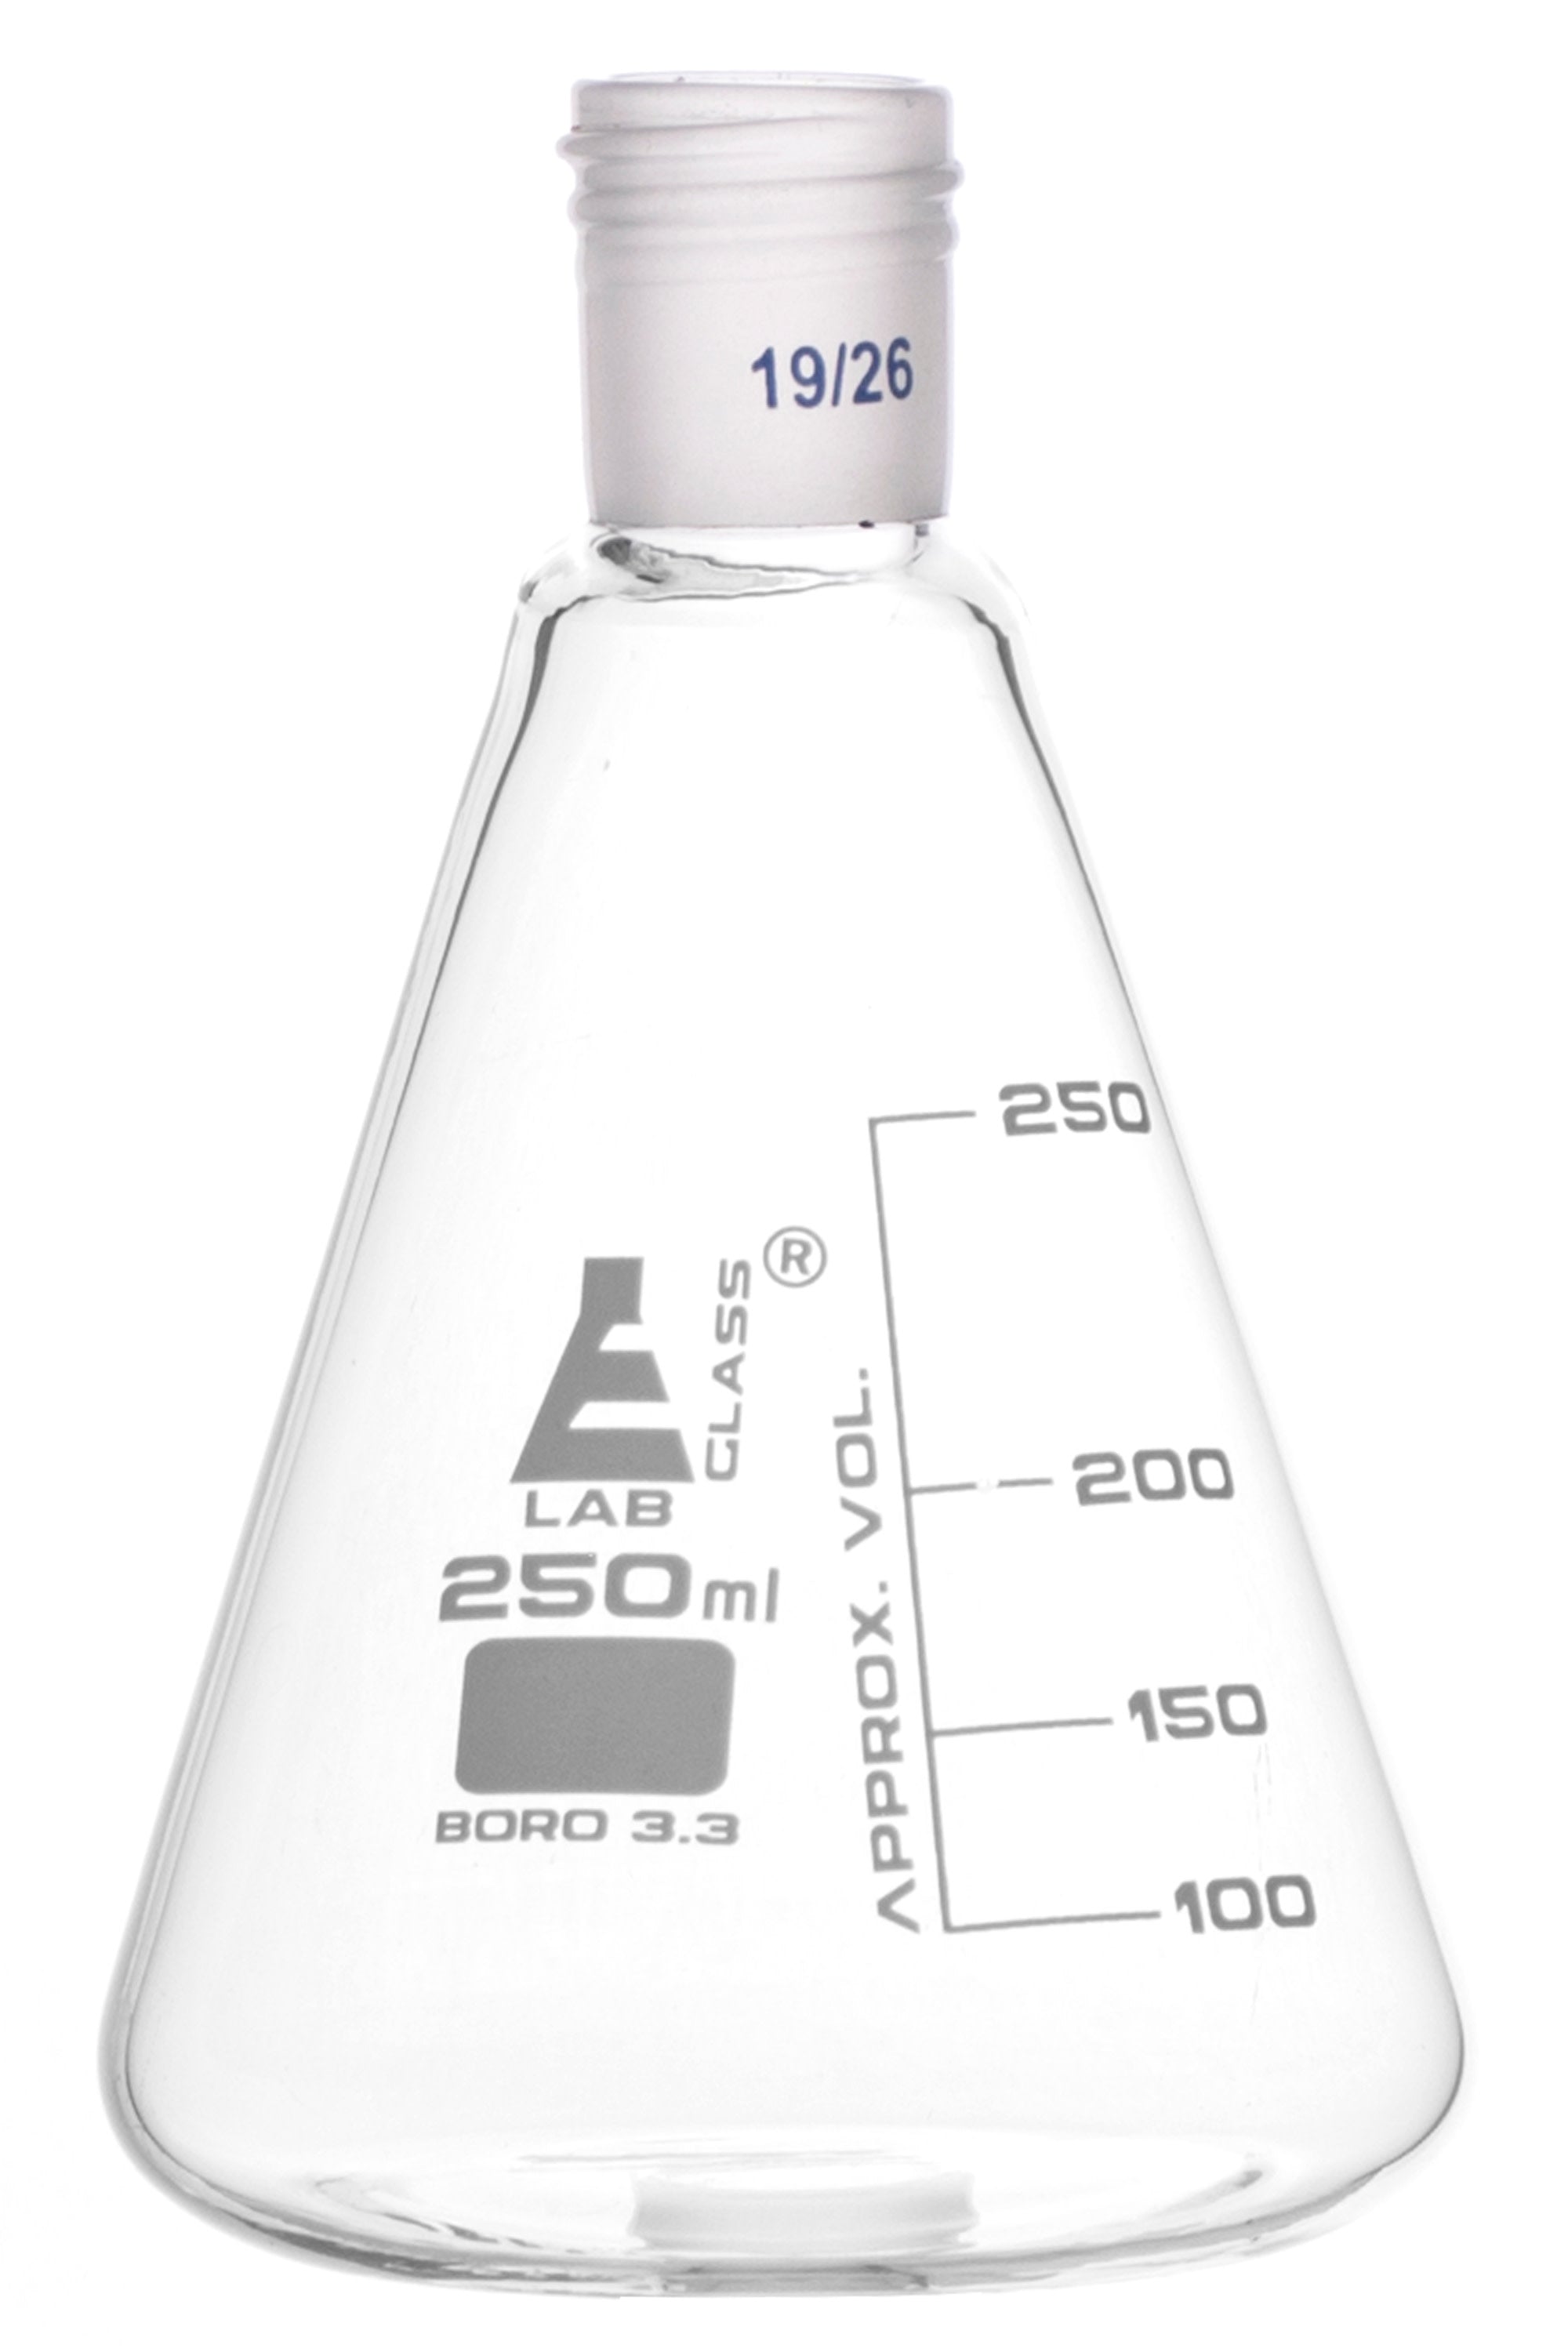 Borosilicate Glass Erlenmeyer Flask with 19/26 Screw Thread Neck Joint, 250 ml, 50 ml Graduations, Autoclavable